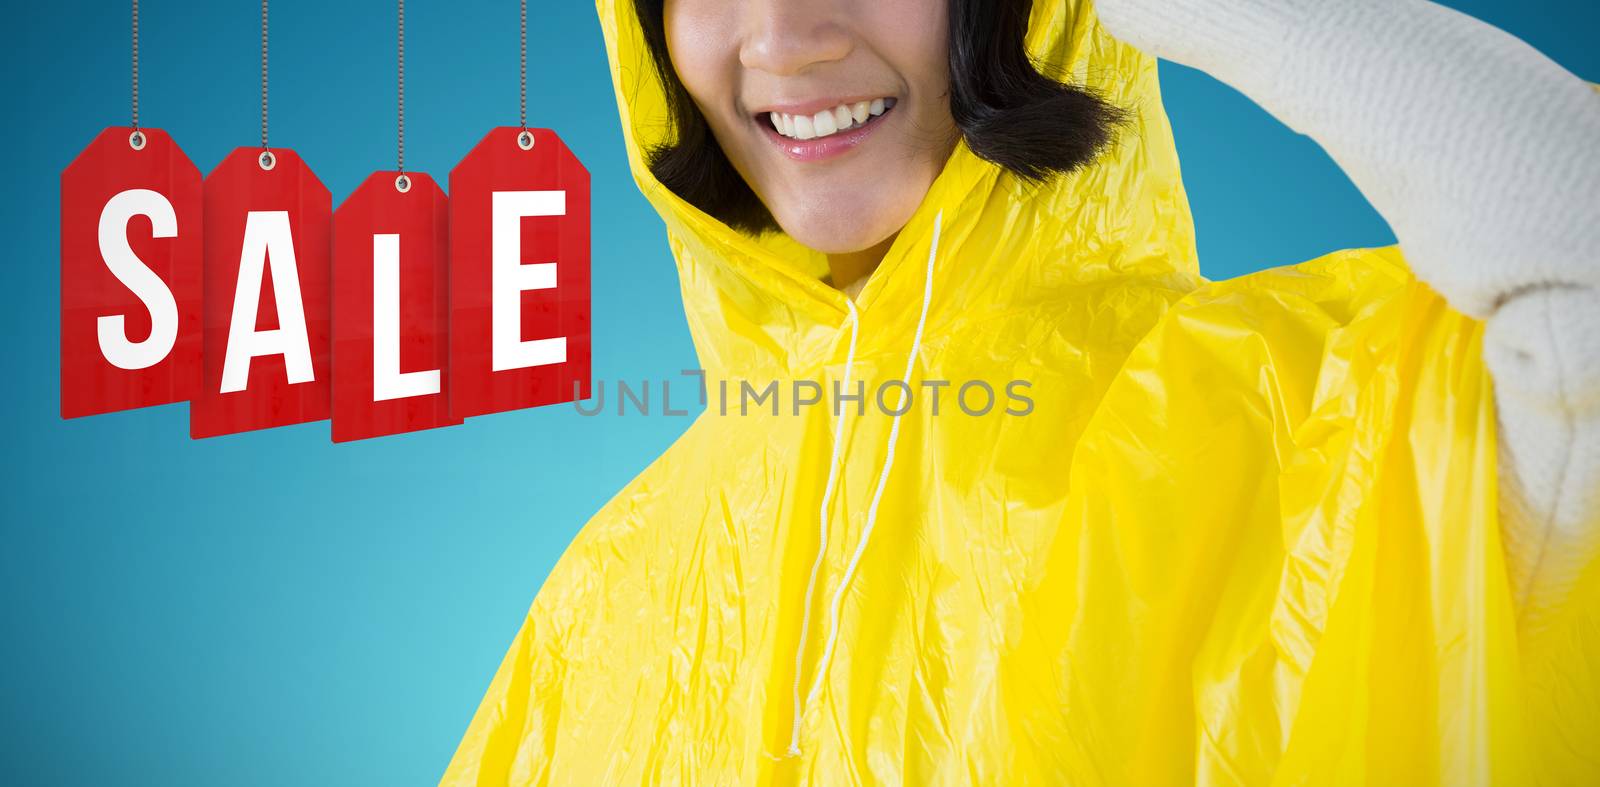 Woman wearing yellow raincoat against white background against abstract blue background